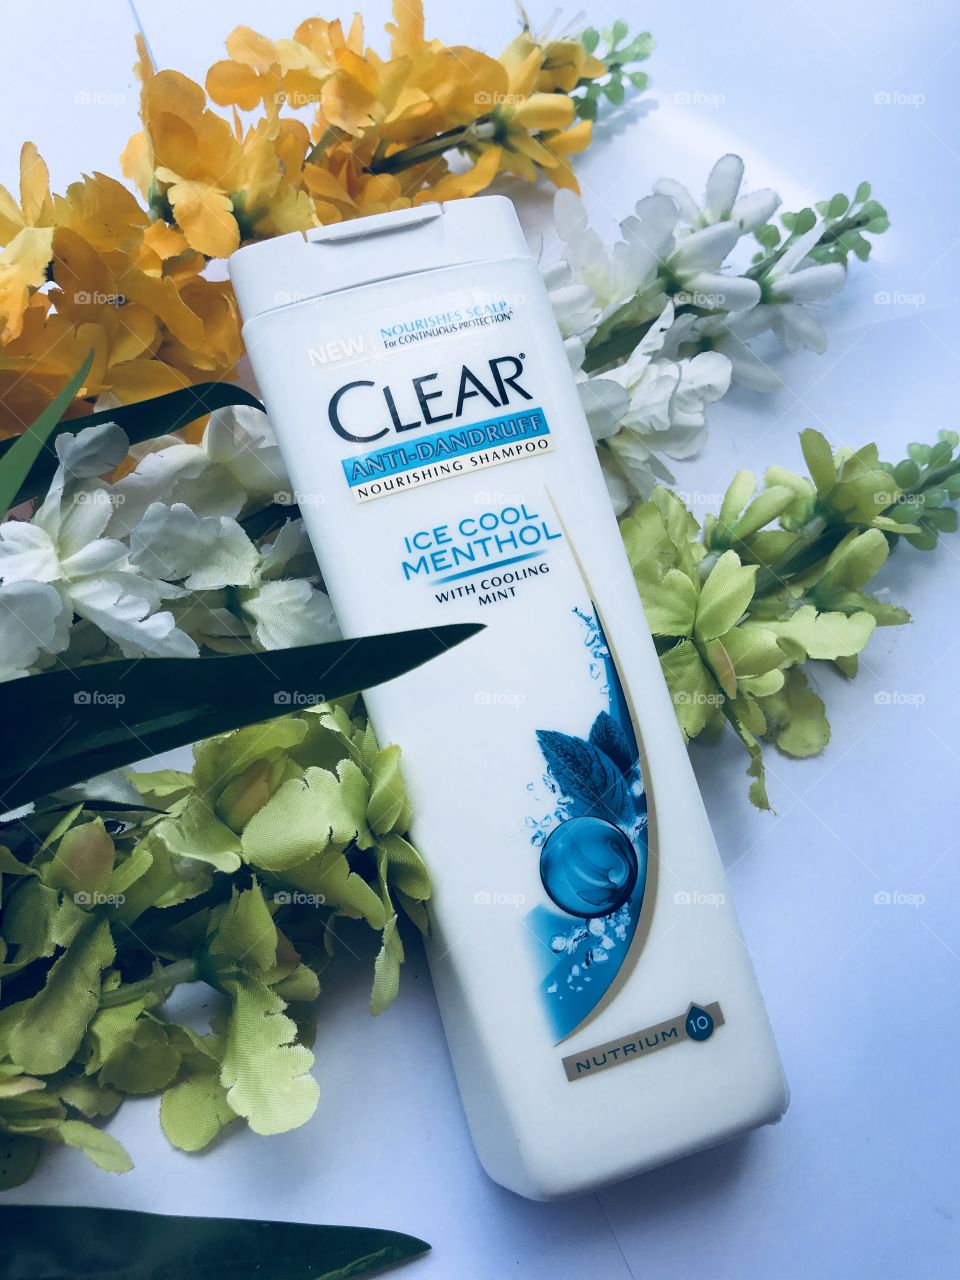 Show your Clear Shampoo